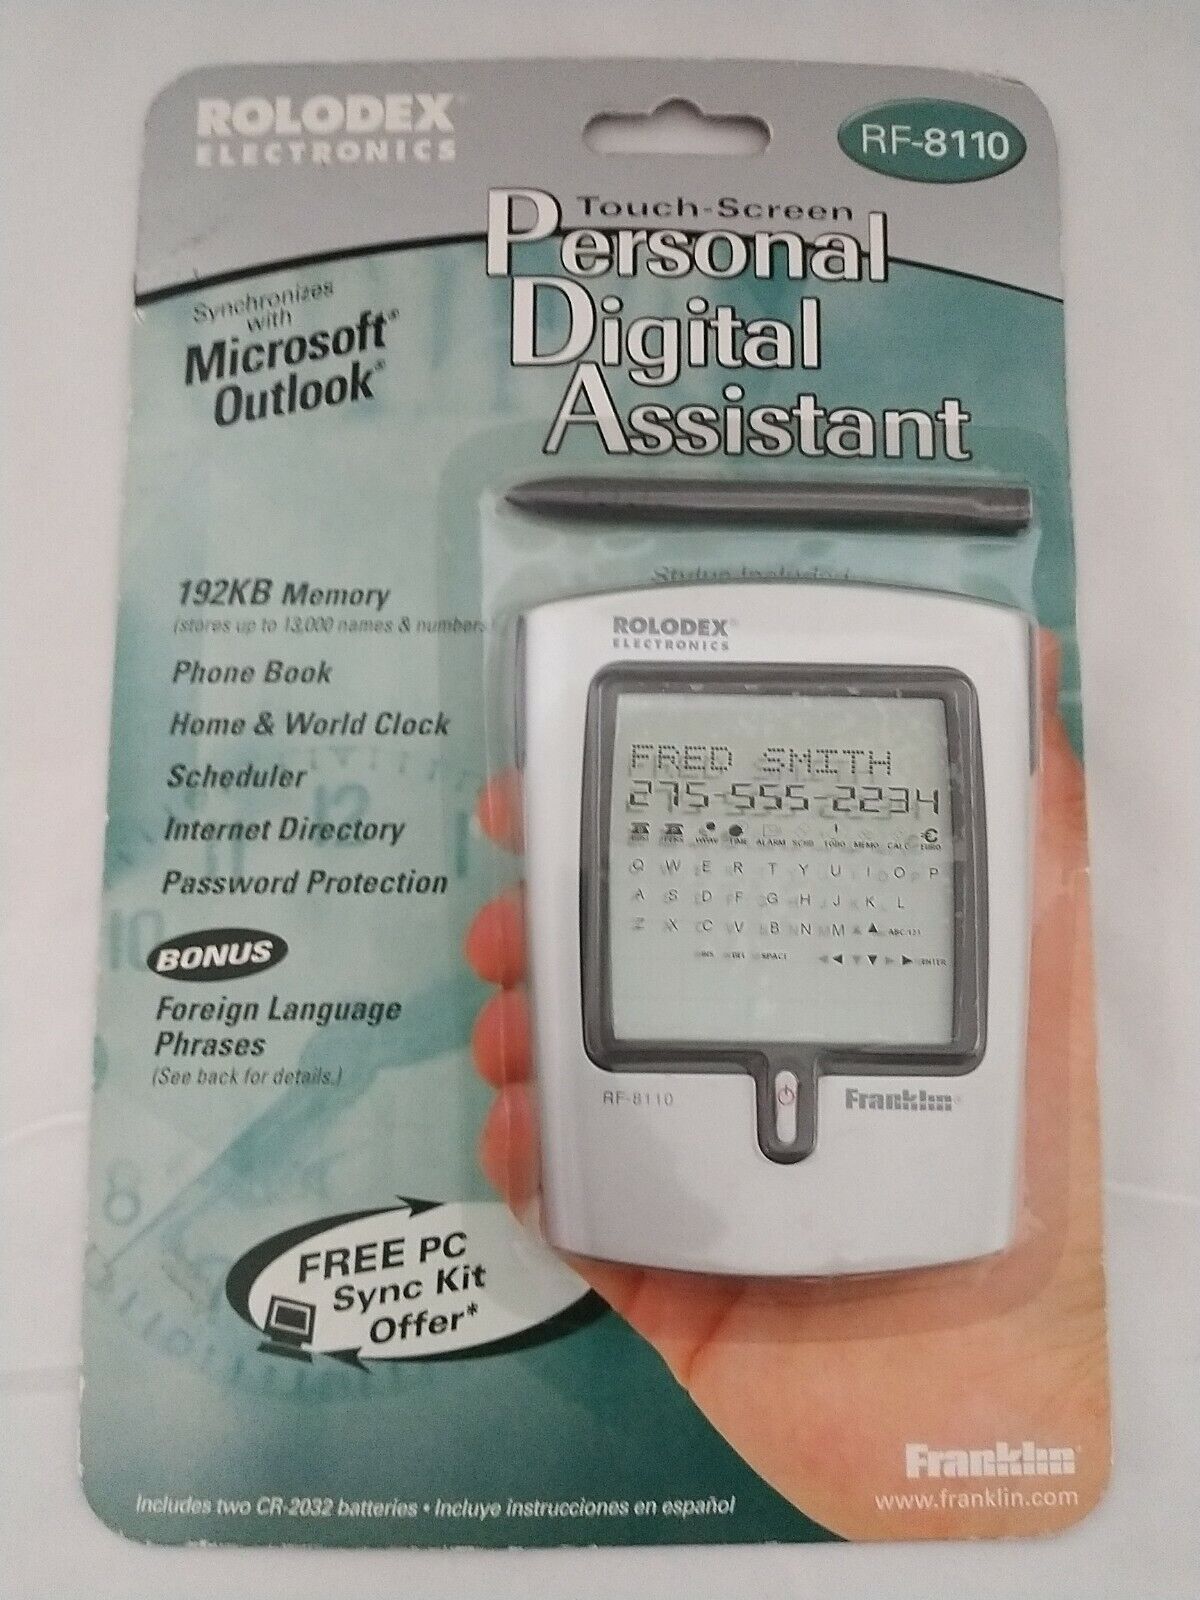 Rolodex Electronics Touch Screen RF-8110 Personal Digital Assistant Franklin RF-8110